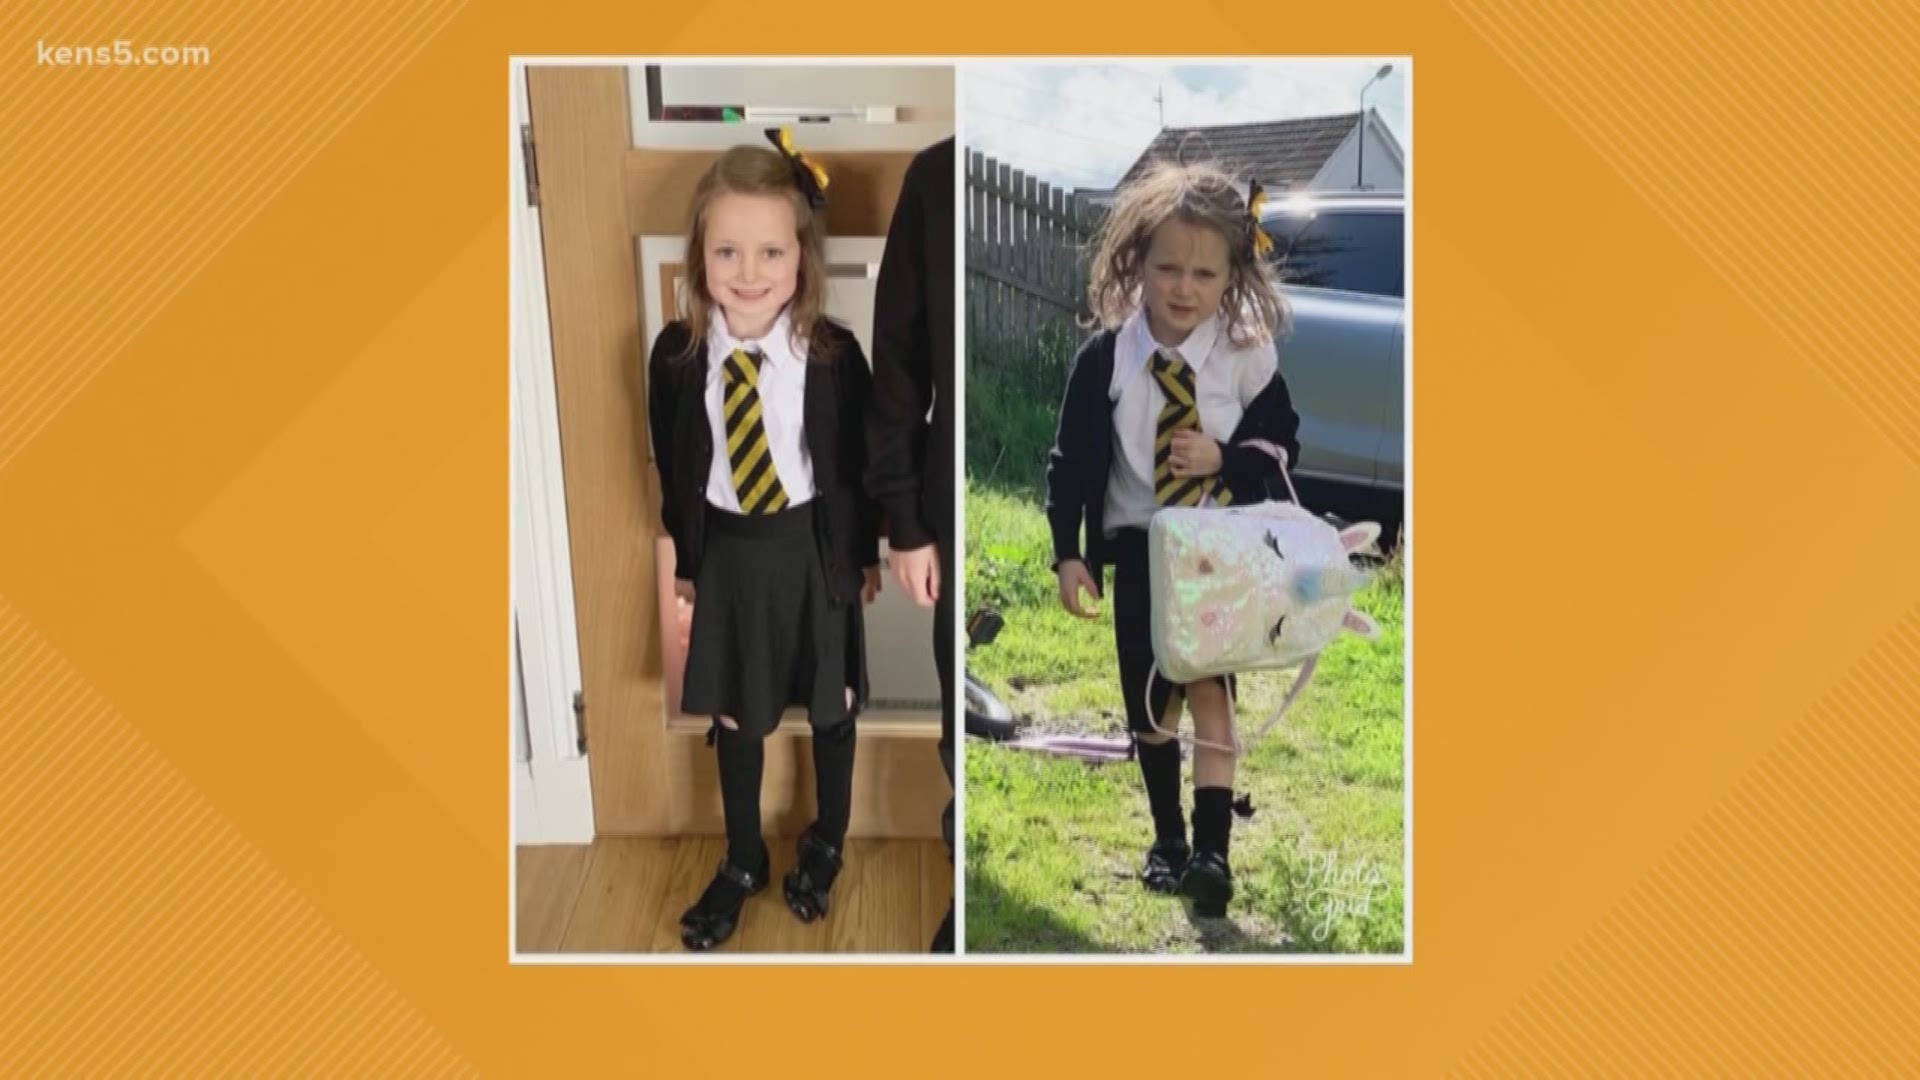 A 5-year-old's first day of school photos go viral and the Waffle House food truck is coming to SA. Digital Journalist Megan Ball shares what's trending online this week.